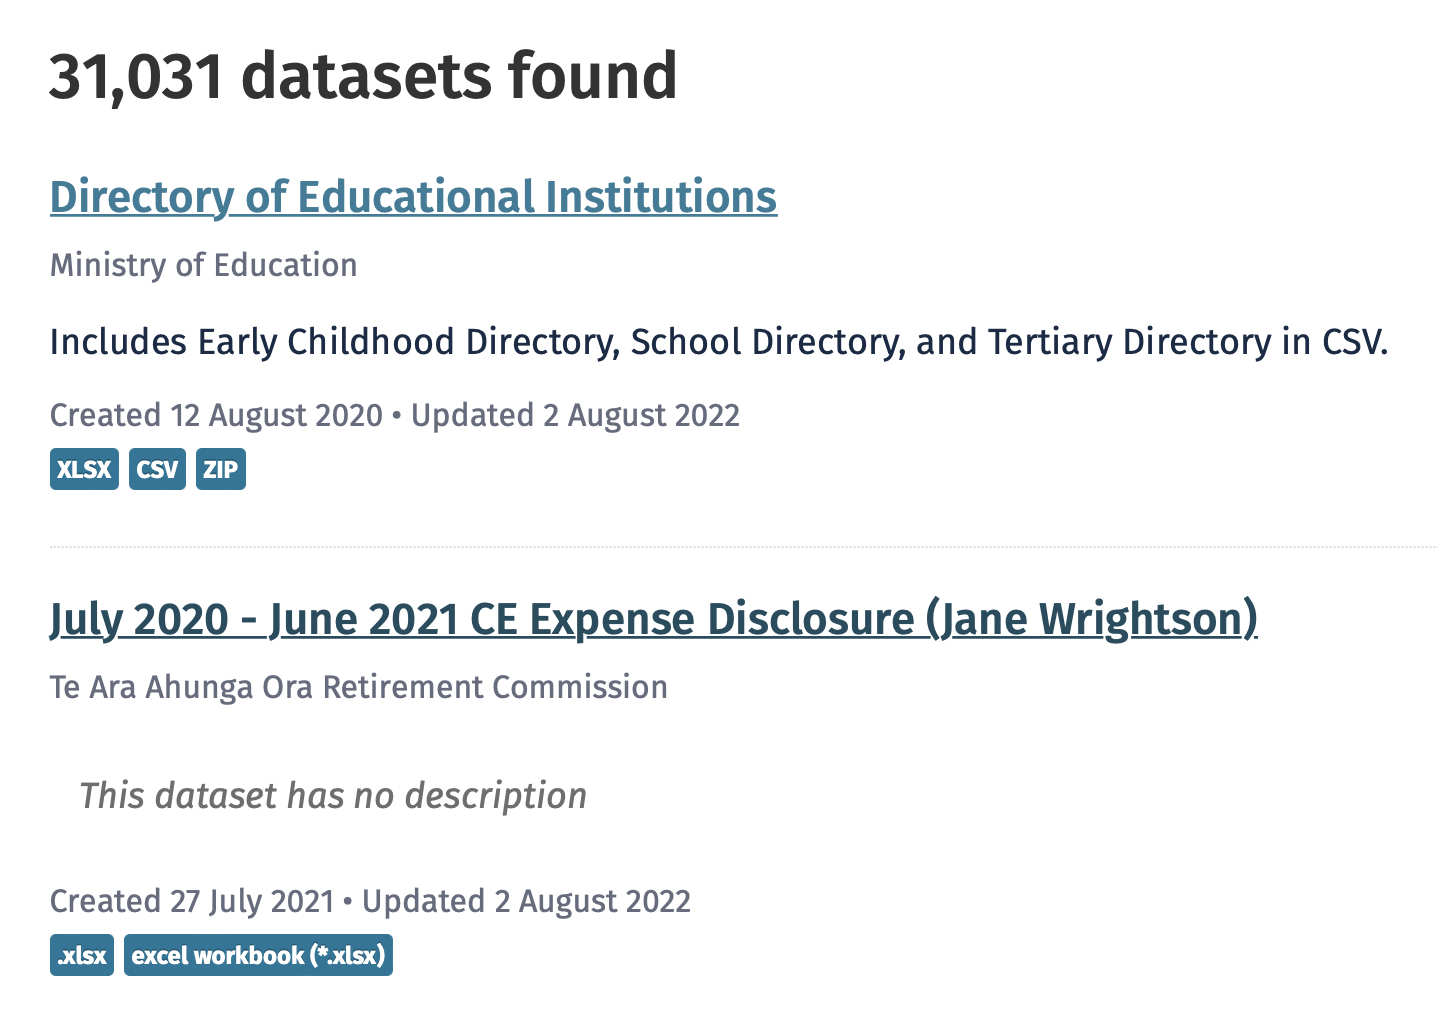 A screenshot of the data.govt.nz catalogue search showing __31,031__ datasets are available. The second dataset listed is MBIE's rental bond data